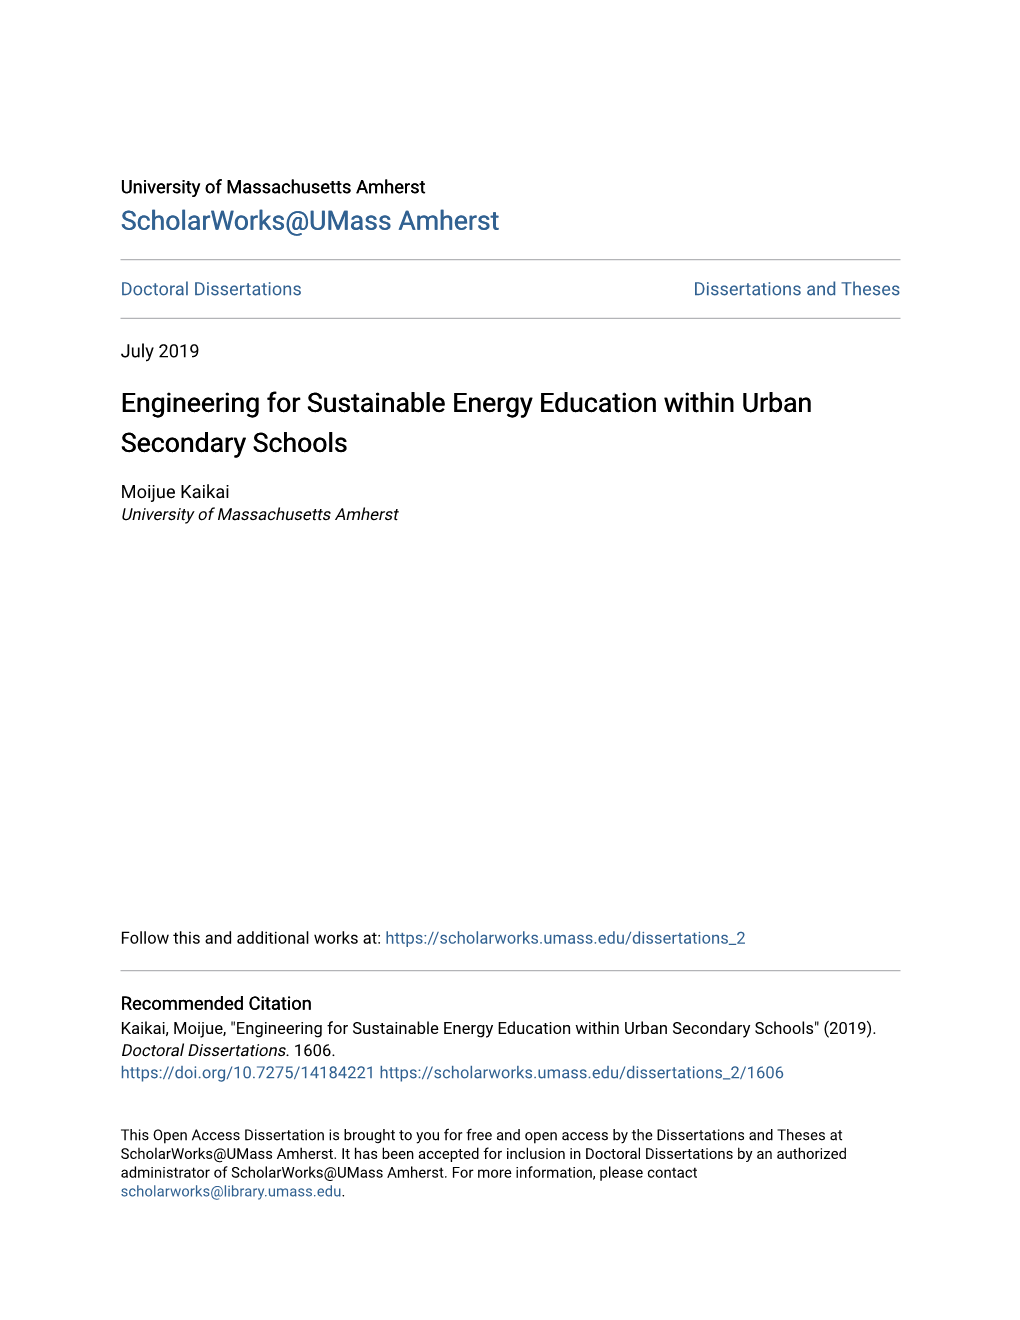 Engineering for Sustainable Energy Education Within Urban Secondary Schools